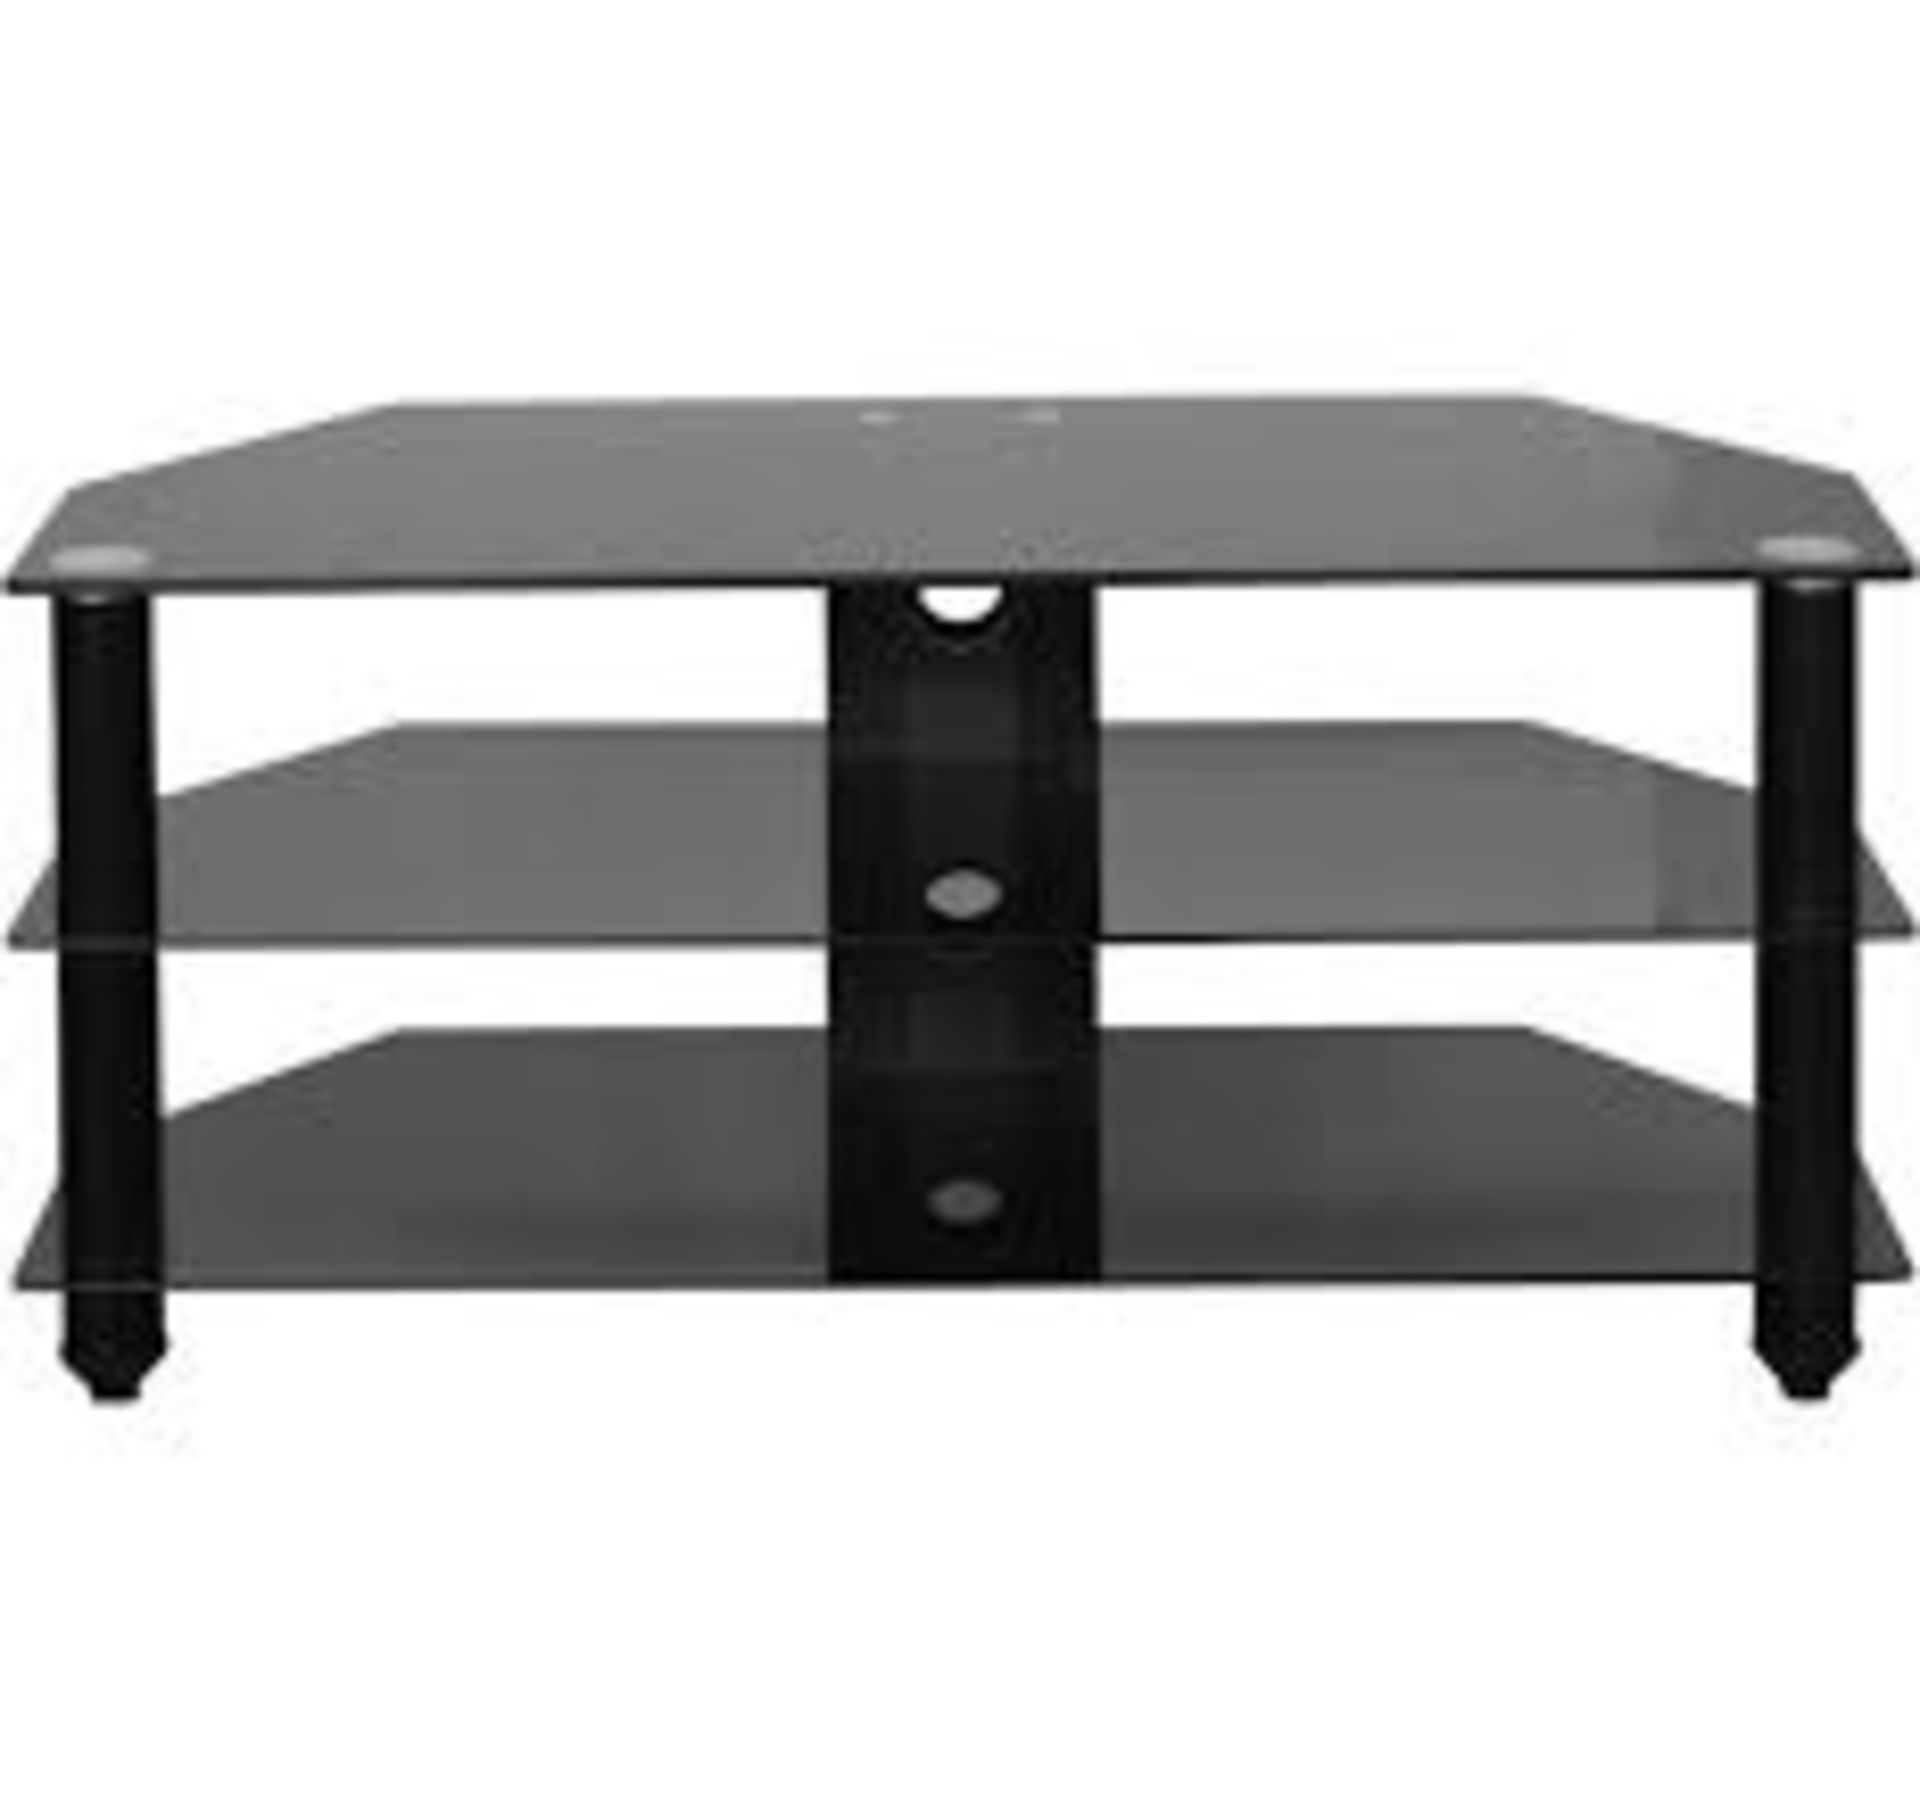 1X BOXED MEDLEY TV STAND